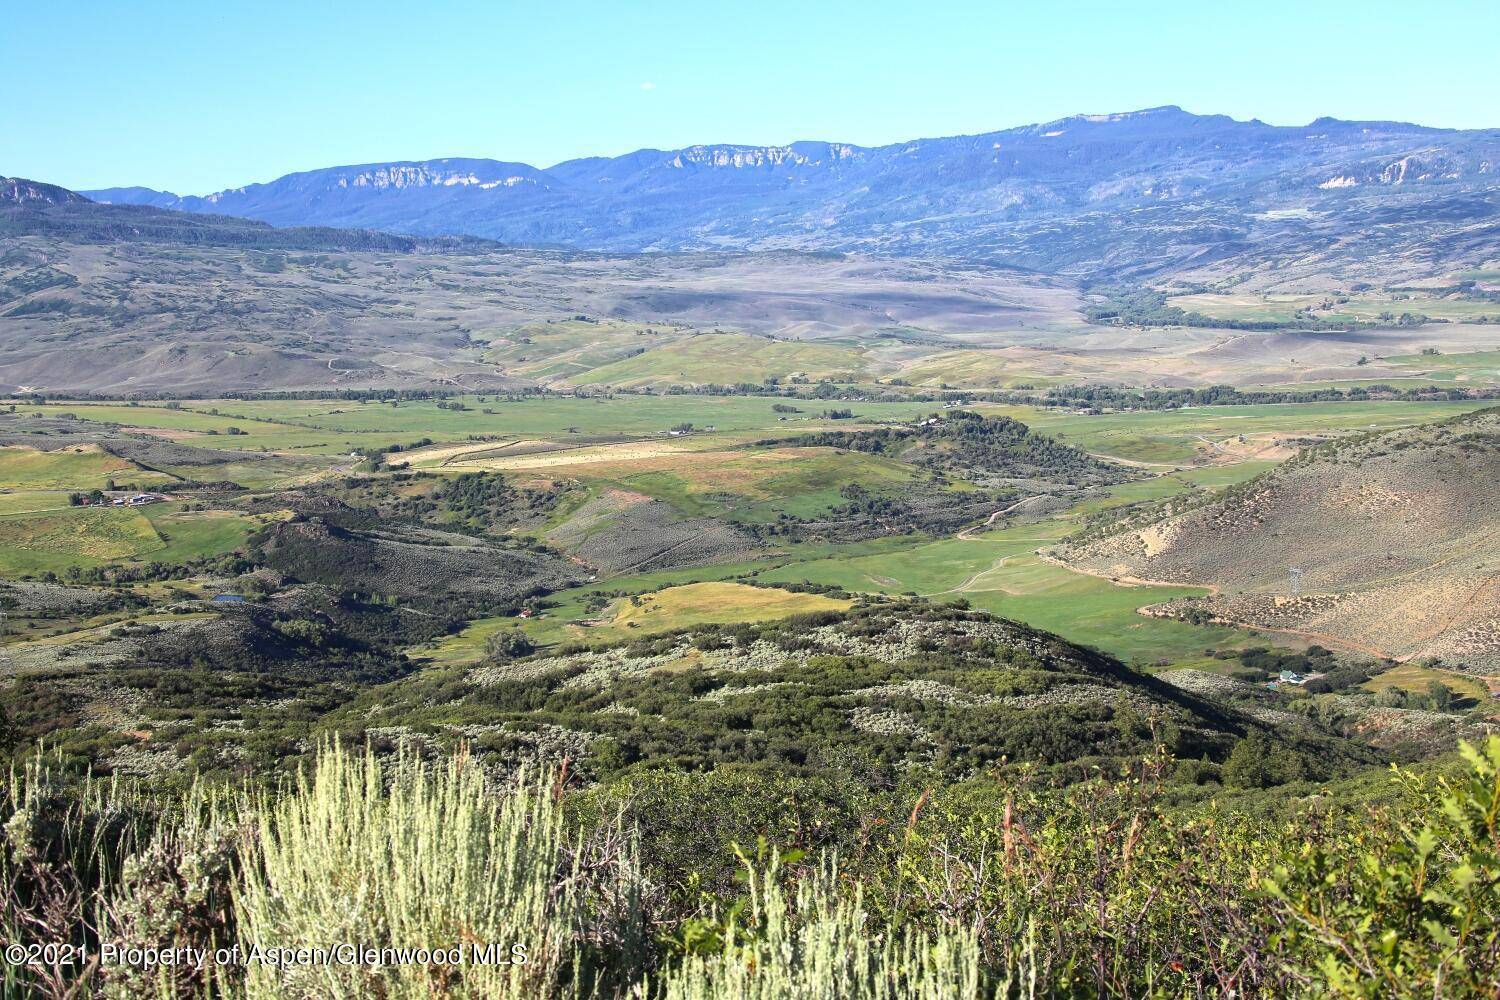 Beginning at 7, 800', the 1, 100 acre ranch extends up to 9, 200' above sea level.